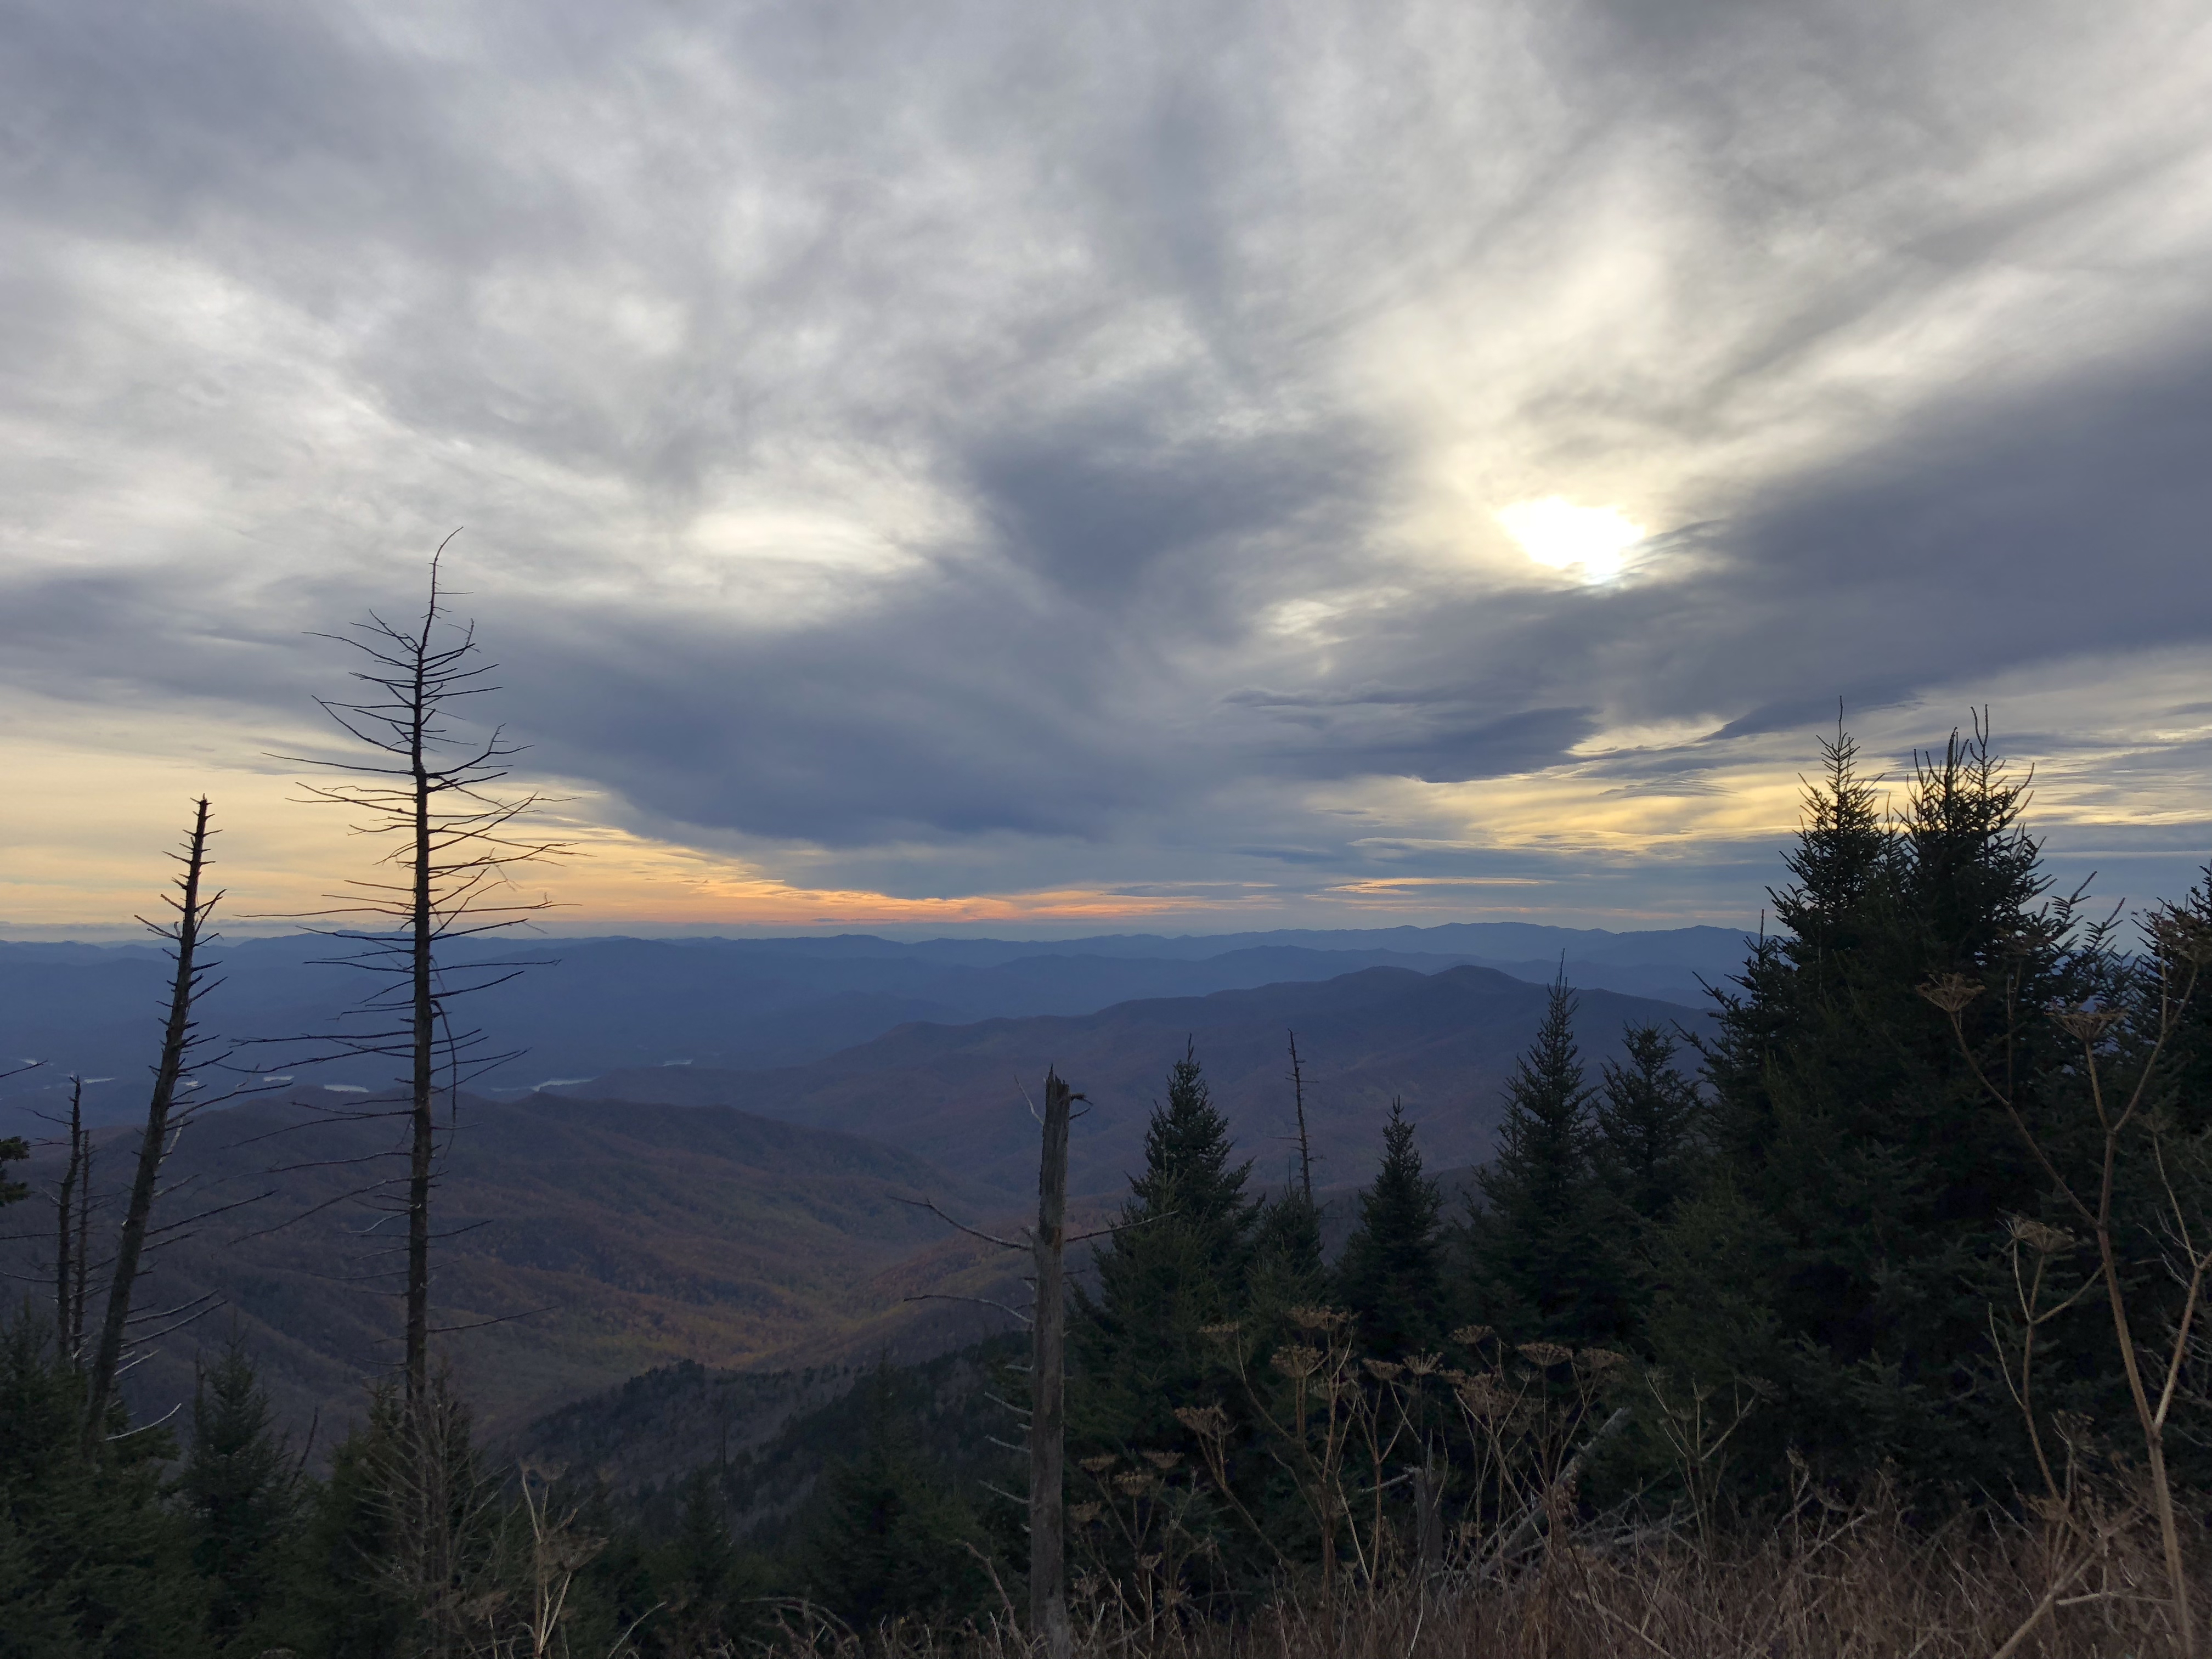 View from Clingmans Dome